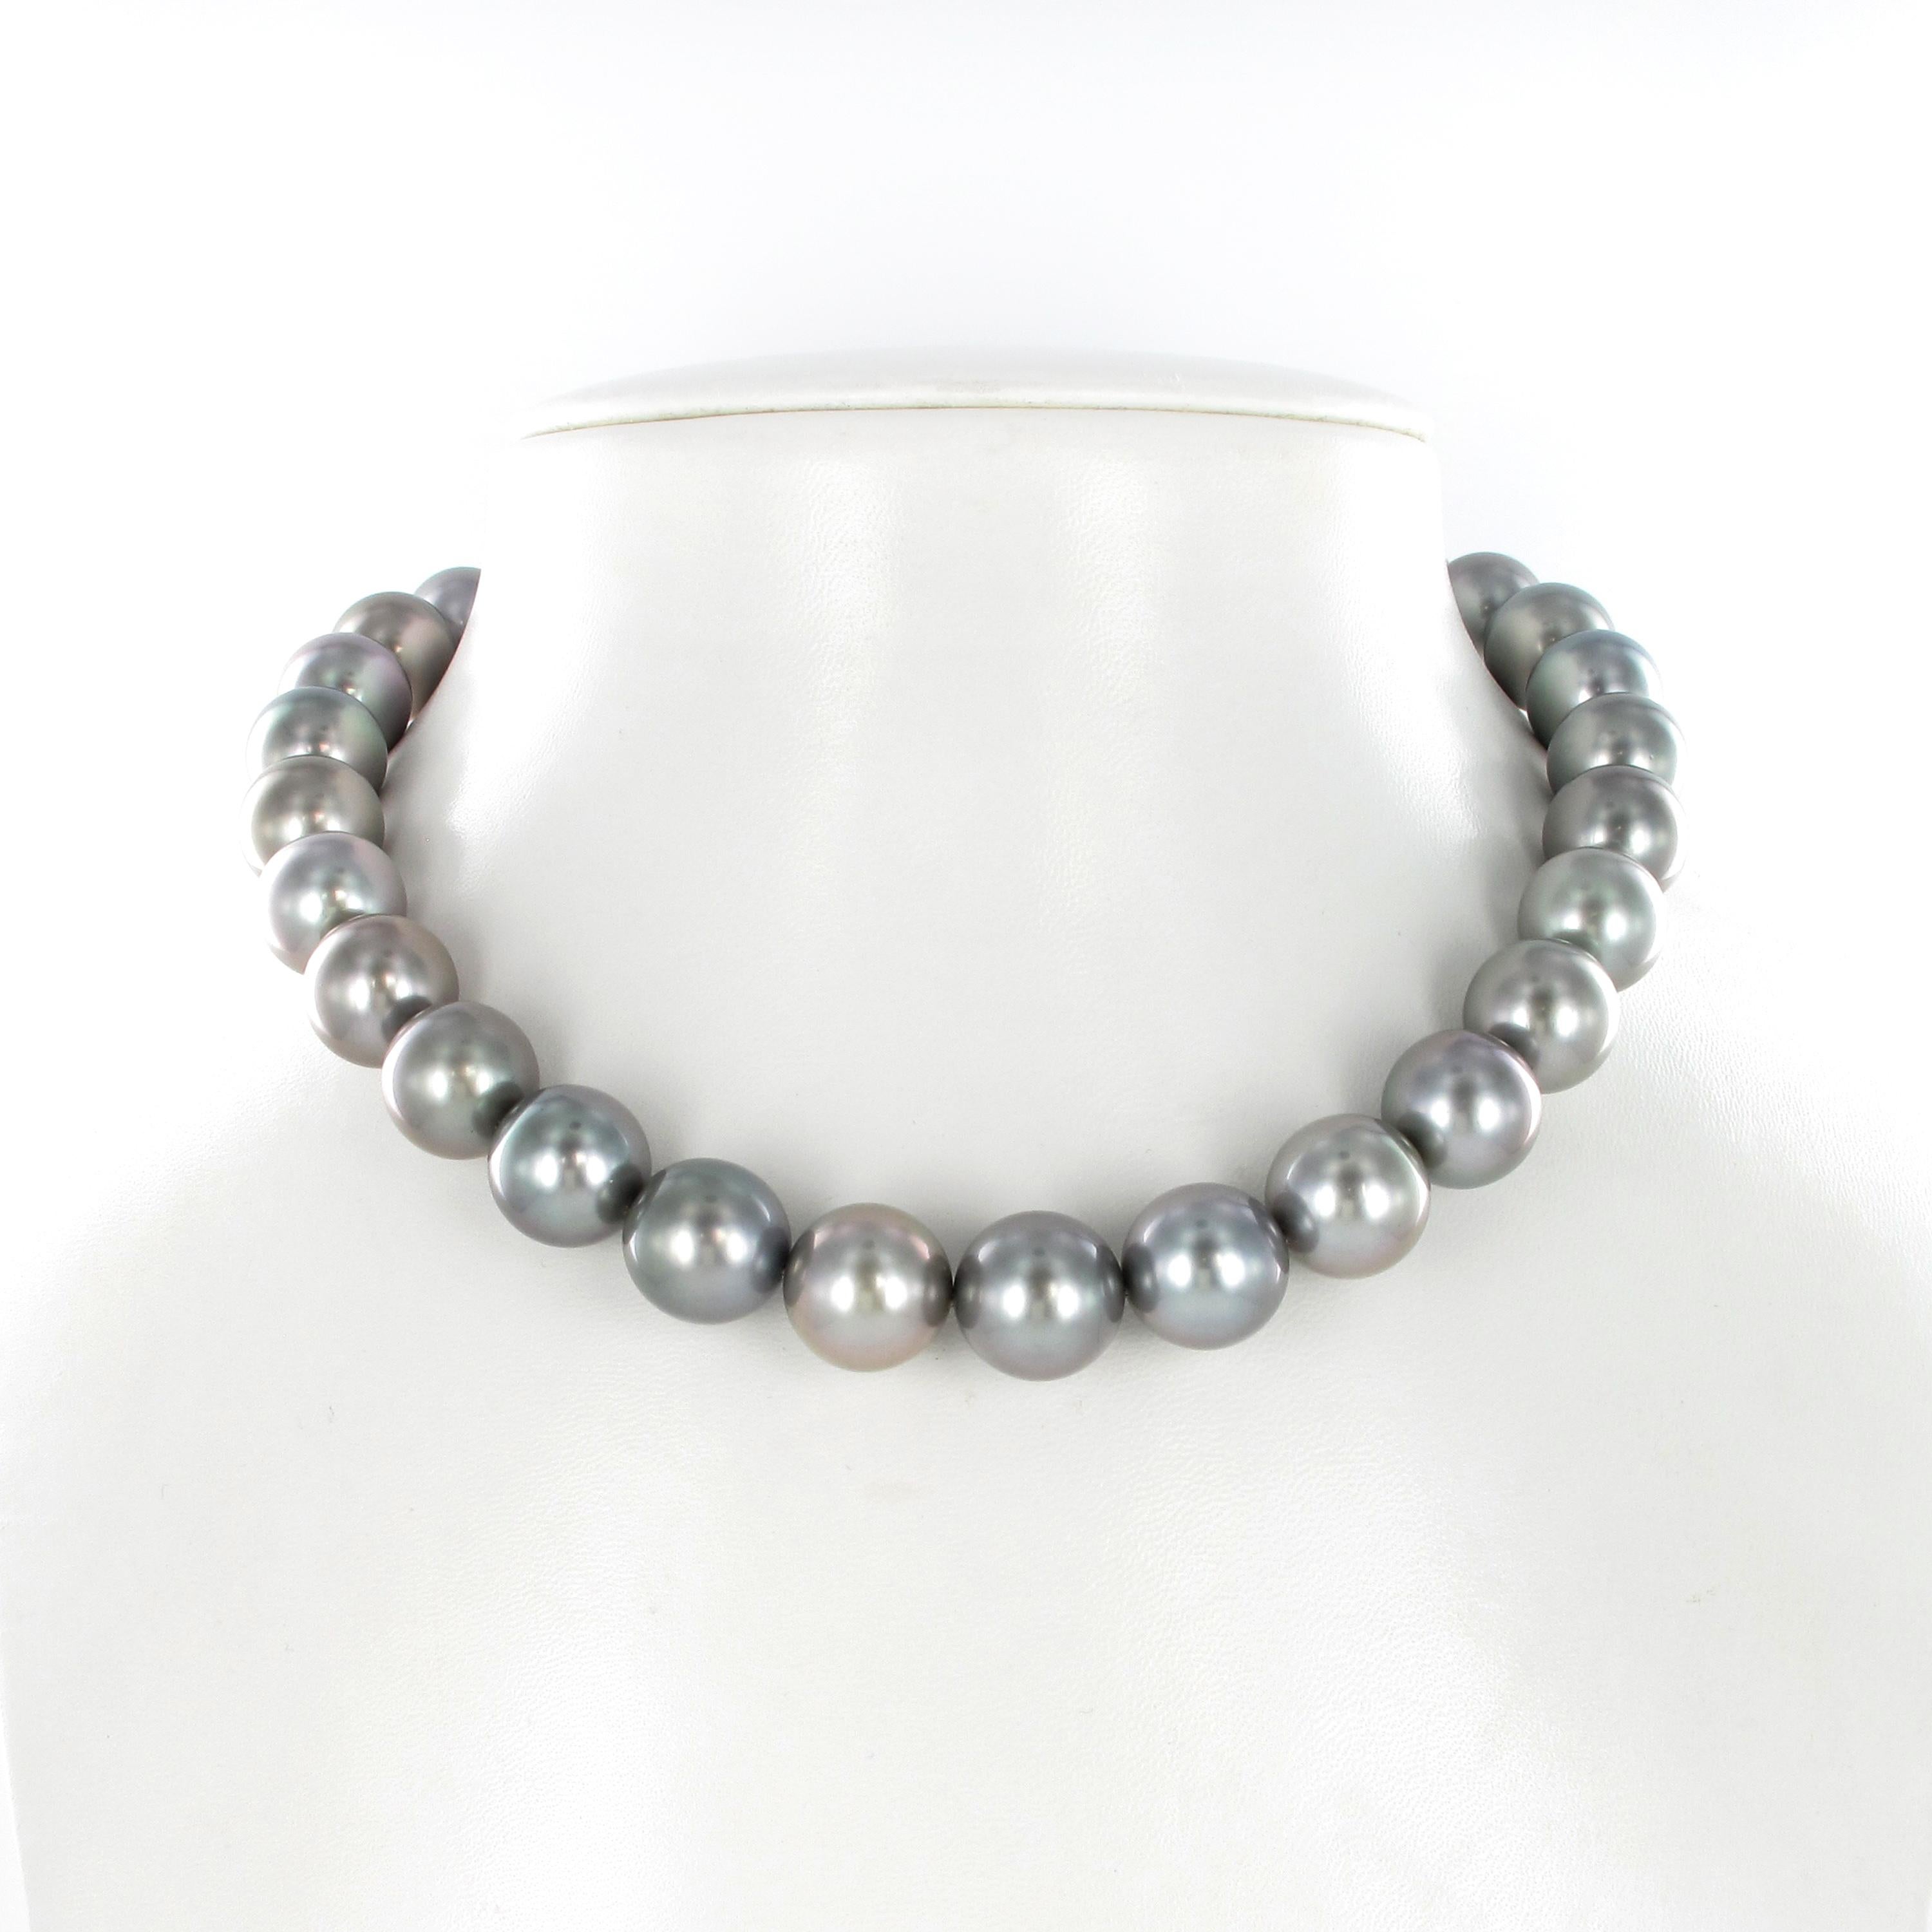 This very fine strand consists of 29 round, medium gray with a slight pink overtone Tahitian cultured pearls graduating from 14.0 mm to 14.9 mm. The pearls are of perfectly round shapes, with a clean surface and an excellent luster. The ball clasp